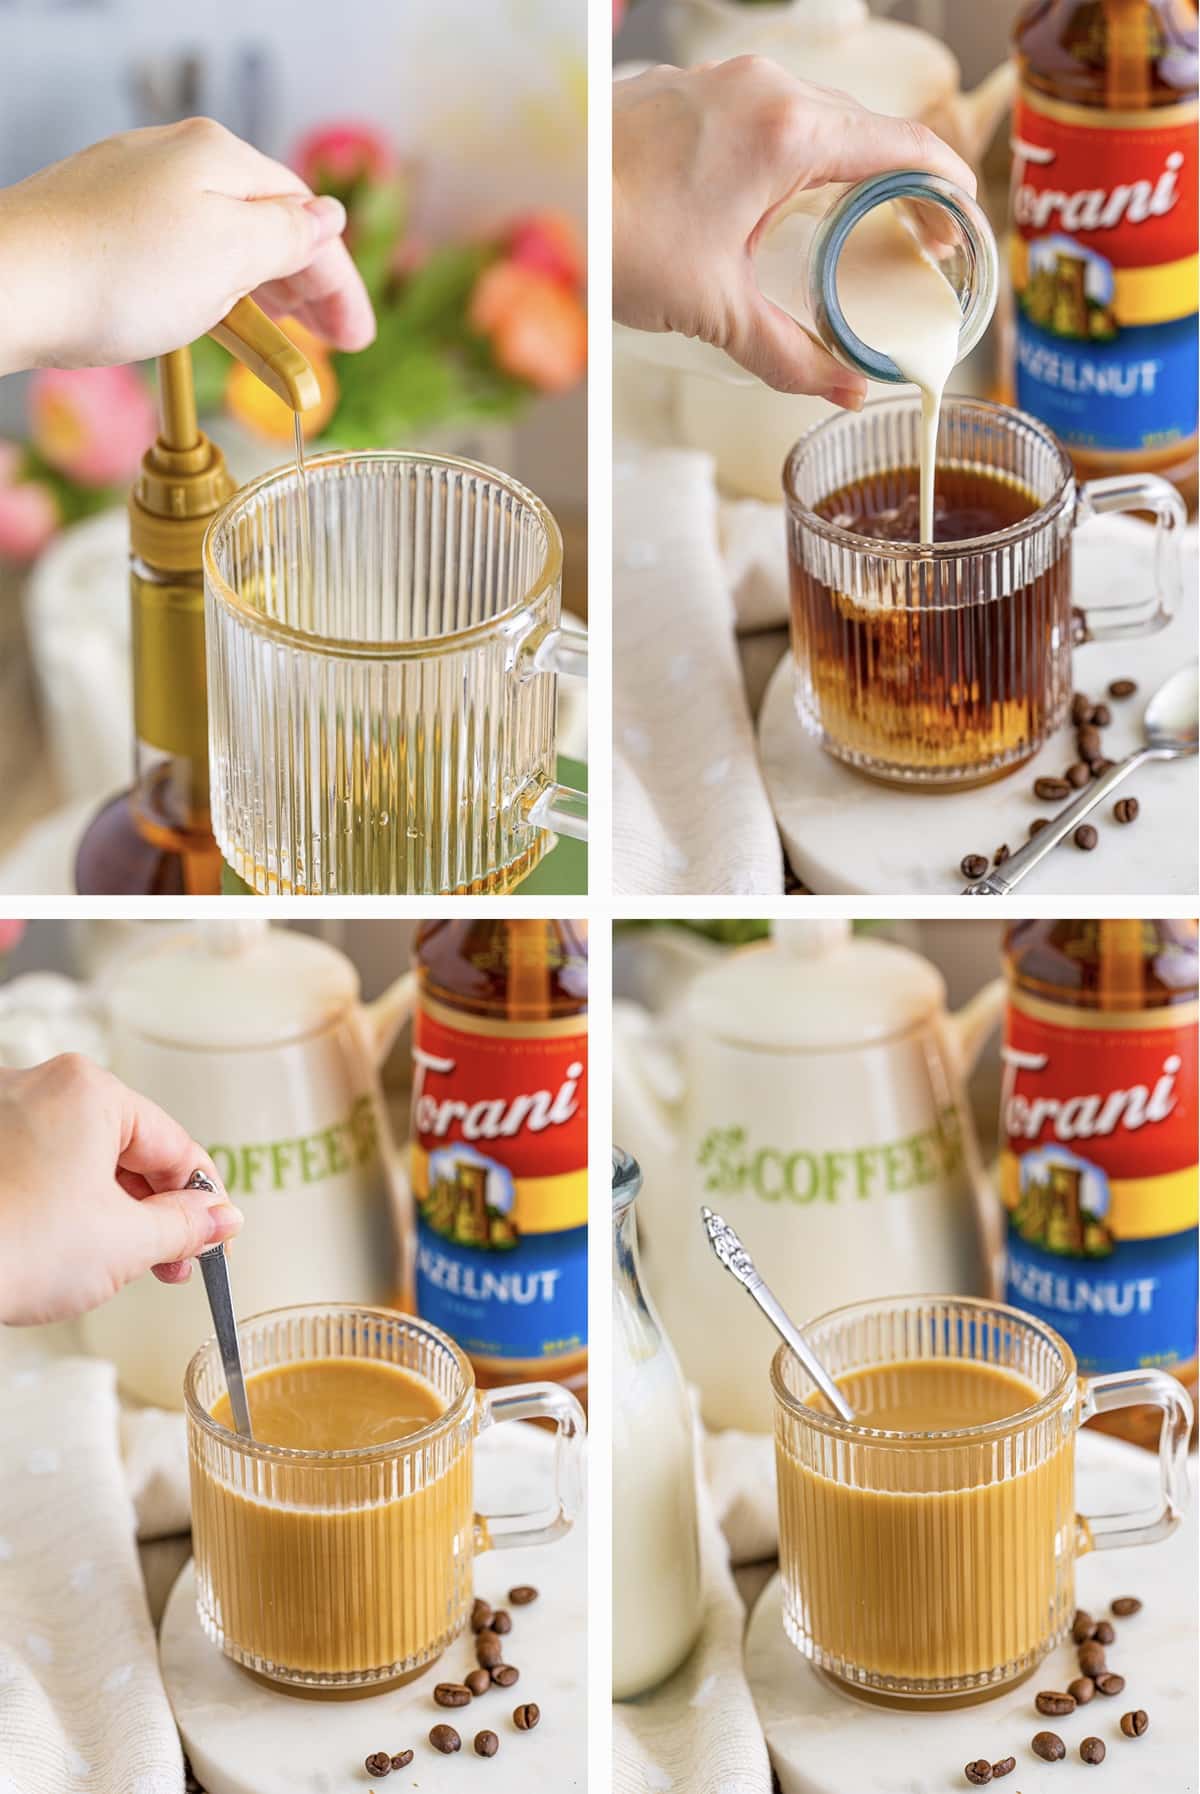 Collage of photos showing how to make hot coffee at home with coffee syrup